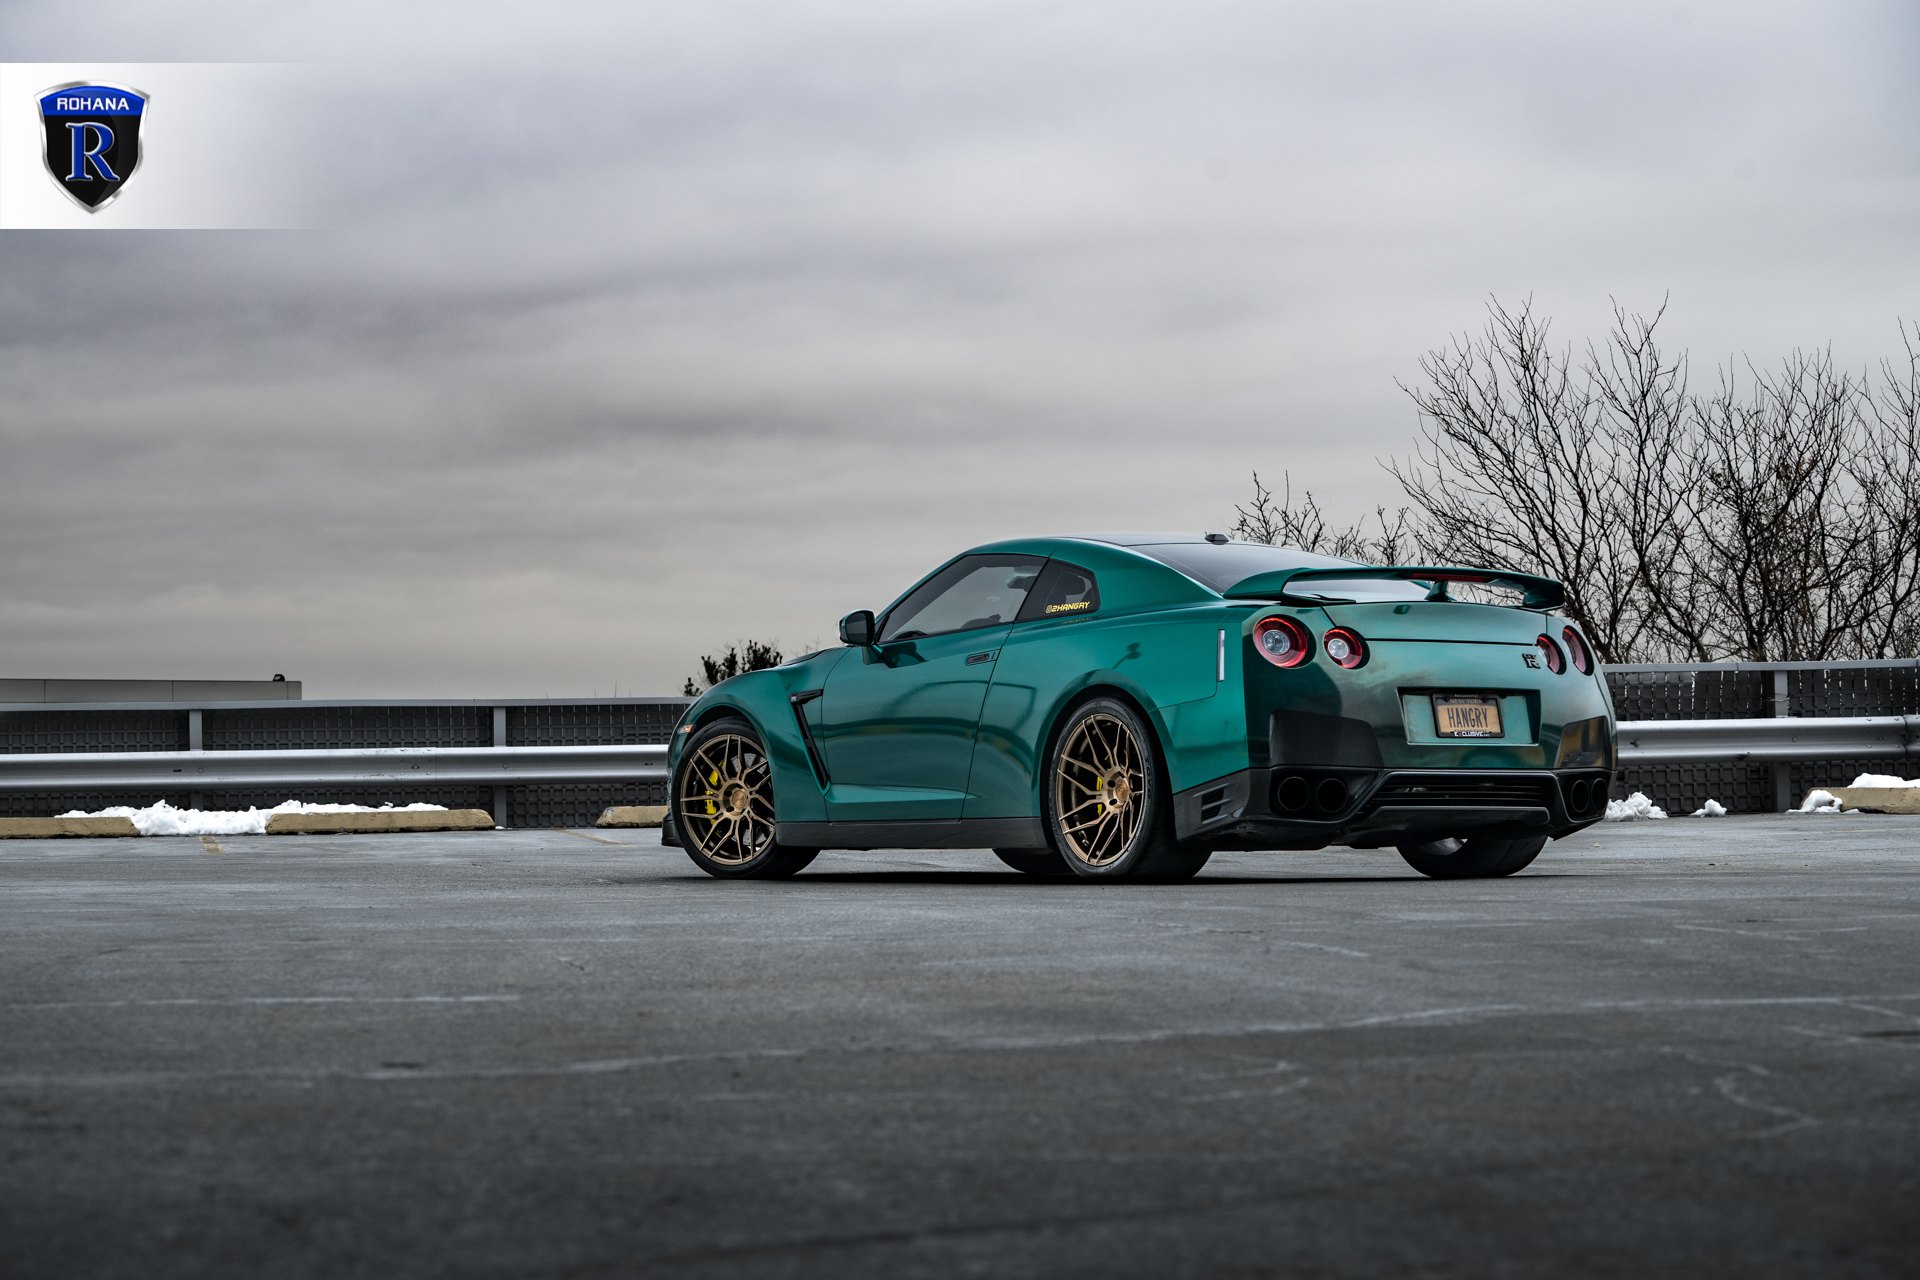 Rear Spoiler with Light on Green Nissan GT-R - Photo by Rohana Wheels